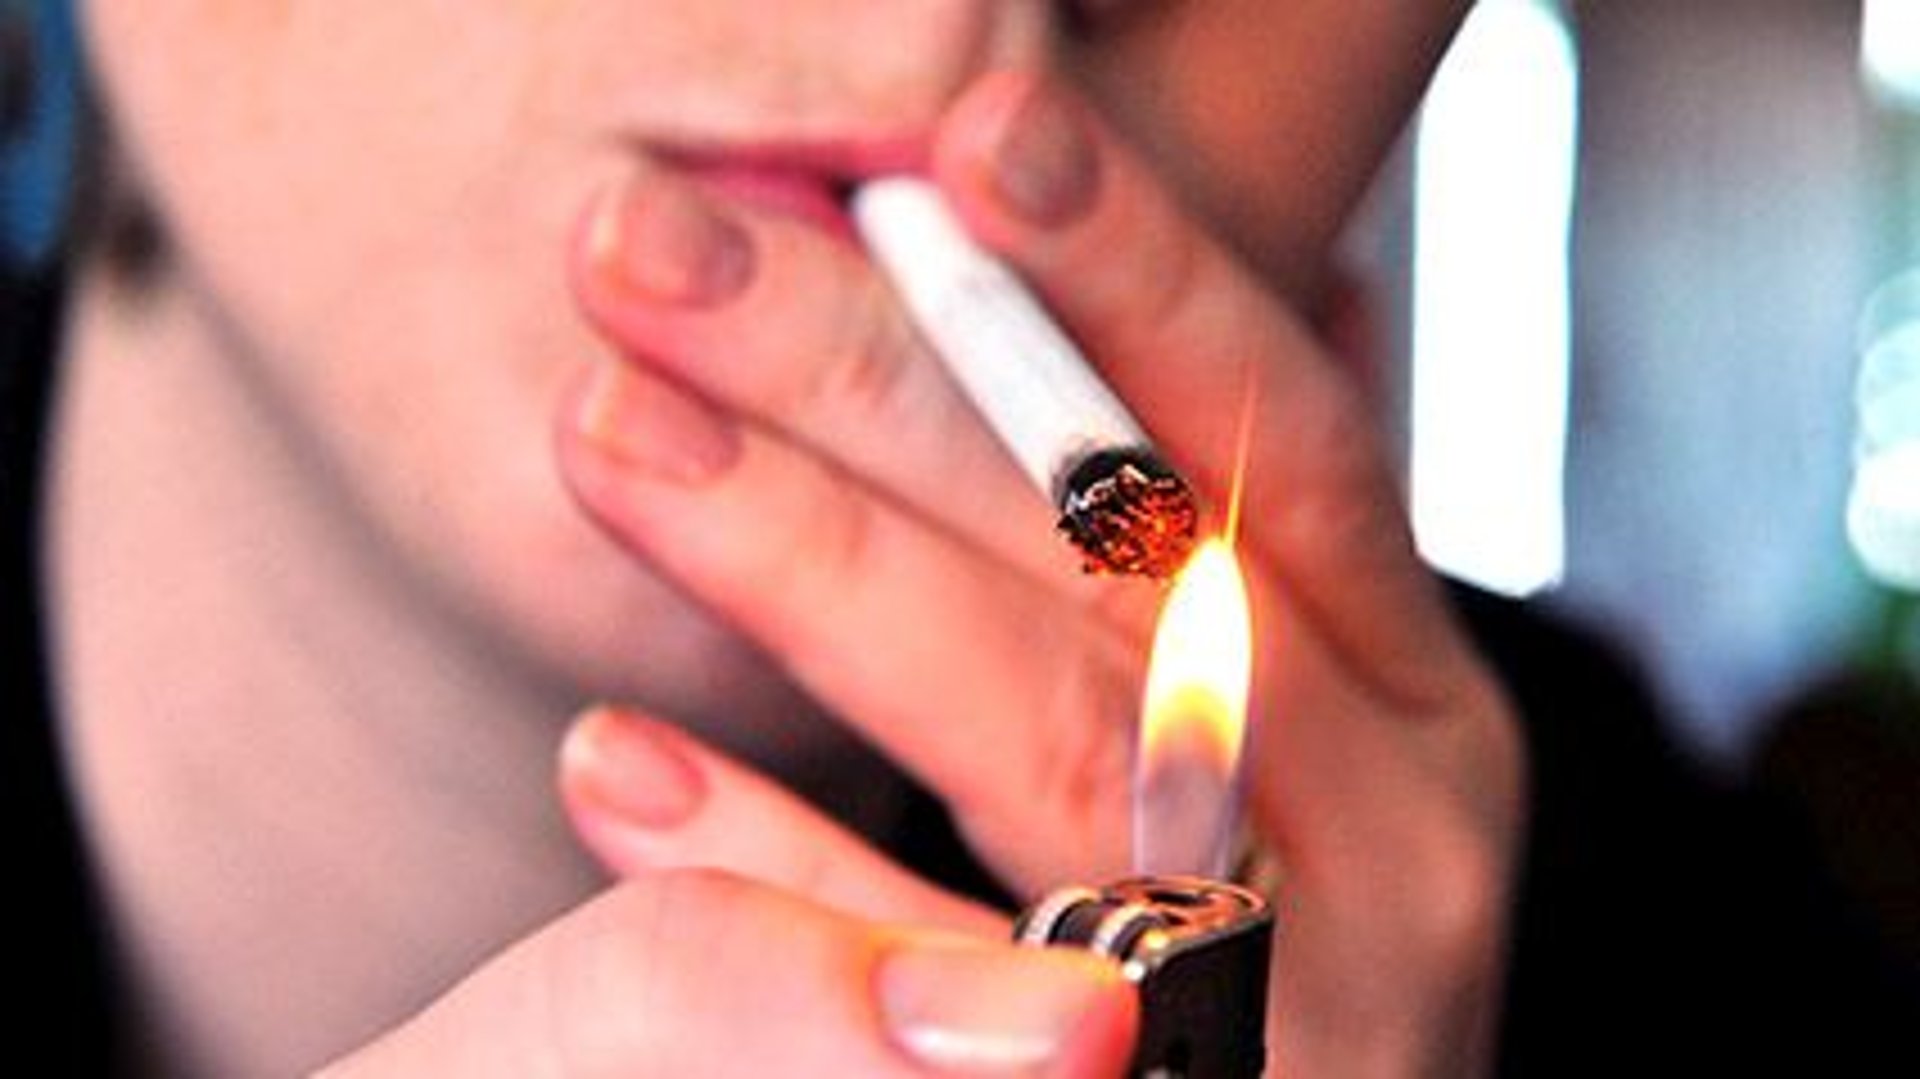 Age When Starting to Smoke Linked to Risk for CVD Mortality thumbnail